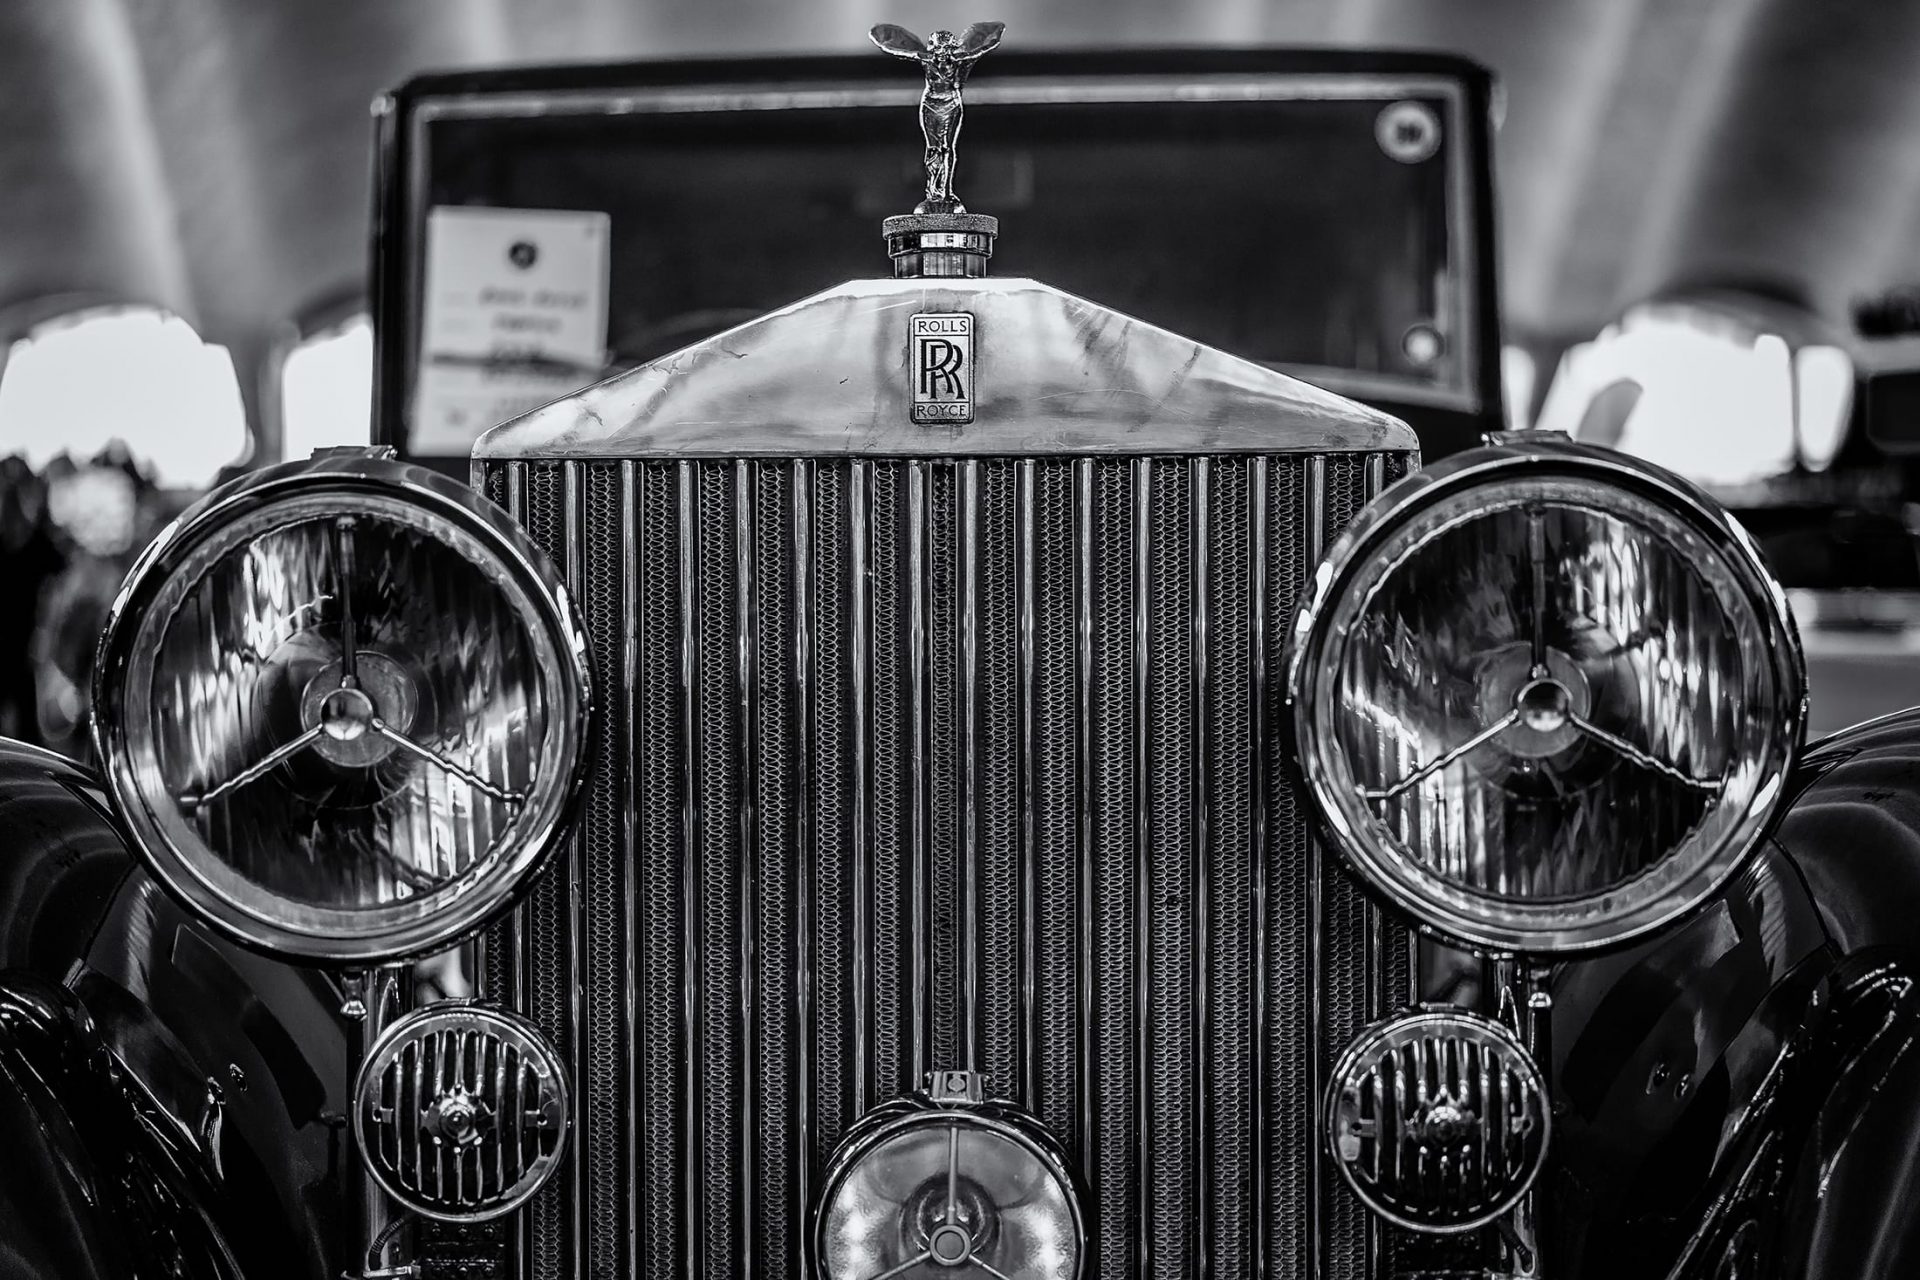 Front view of classic Rolls Royce